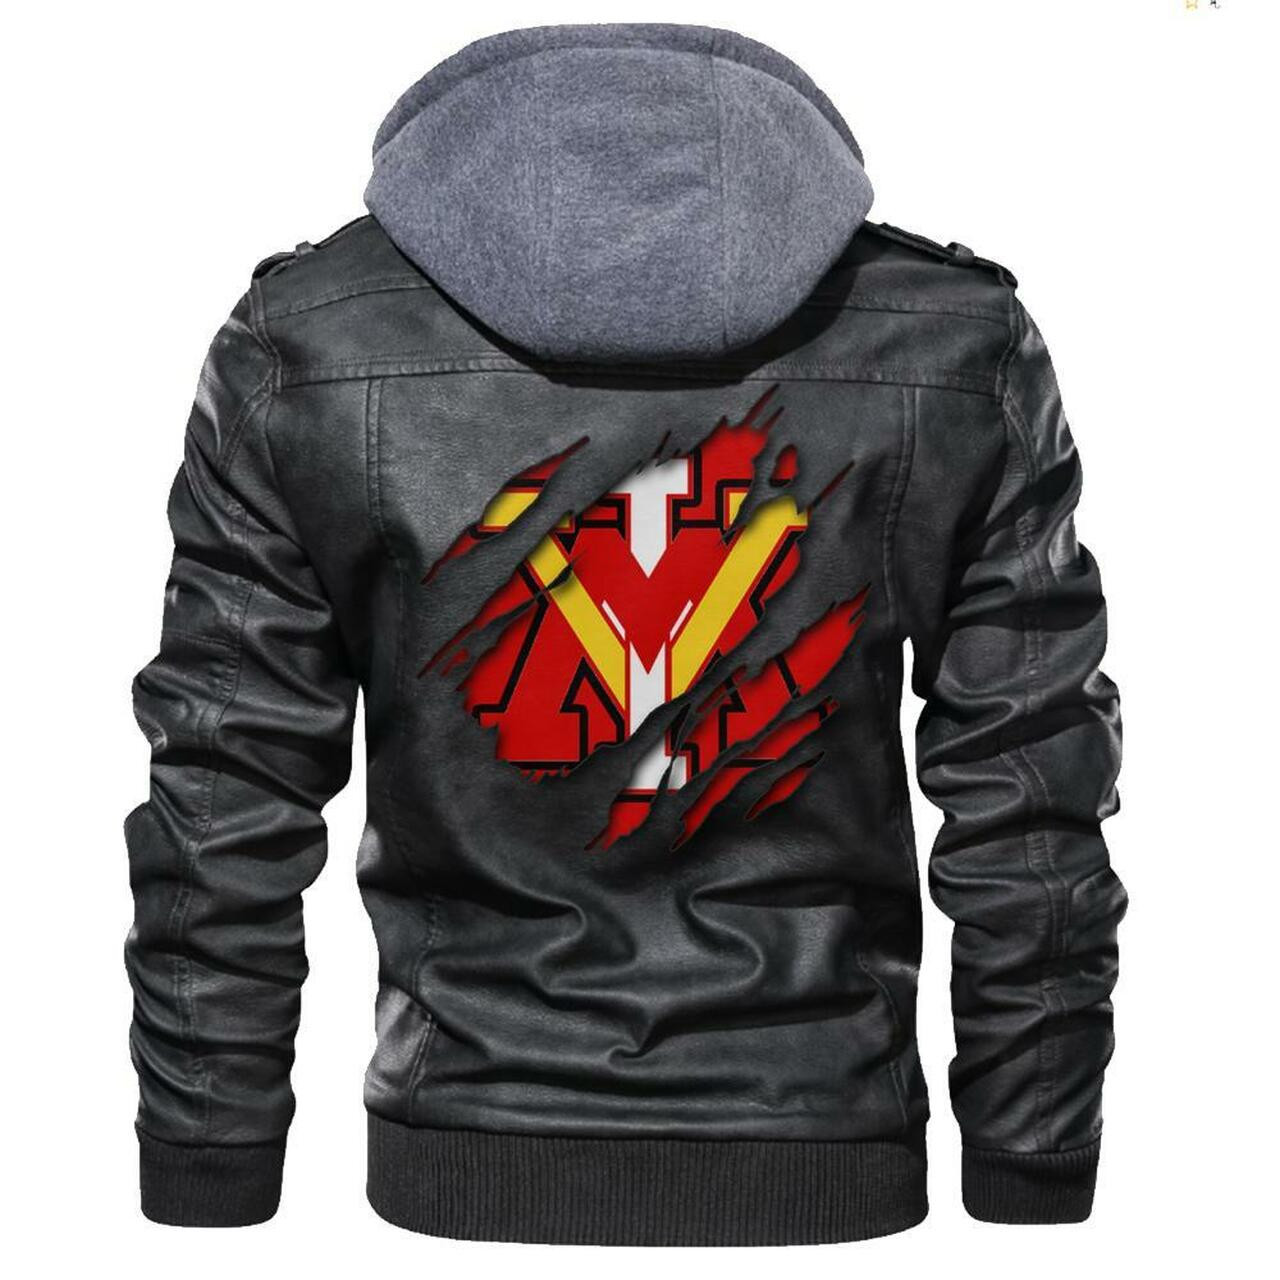 Check out and find the right leather jacket below 133